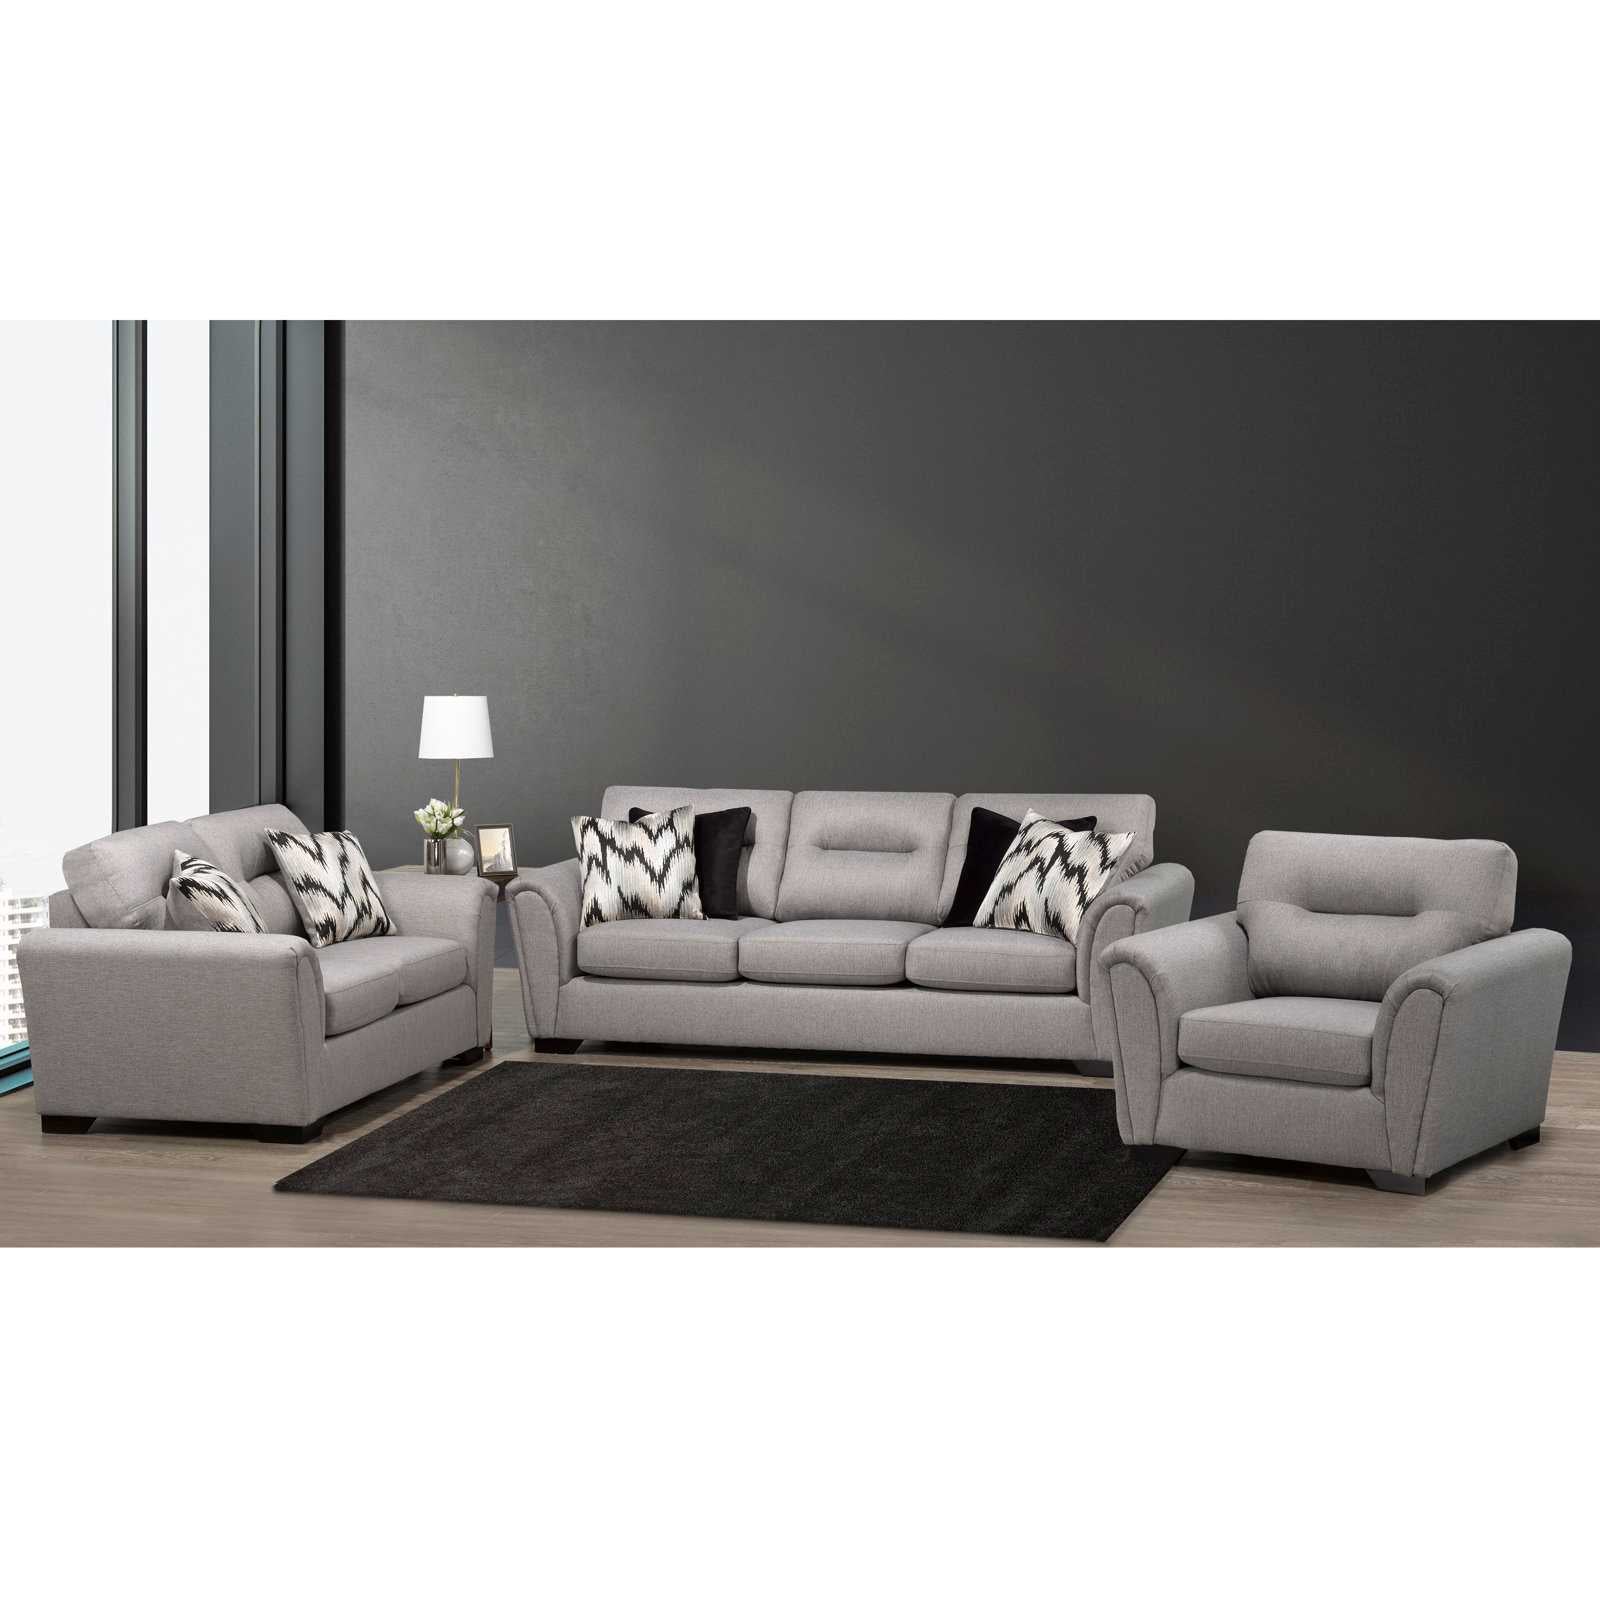 Canadian Made Zesus Fawn Sofa Collection 9559